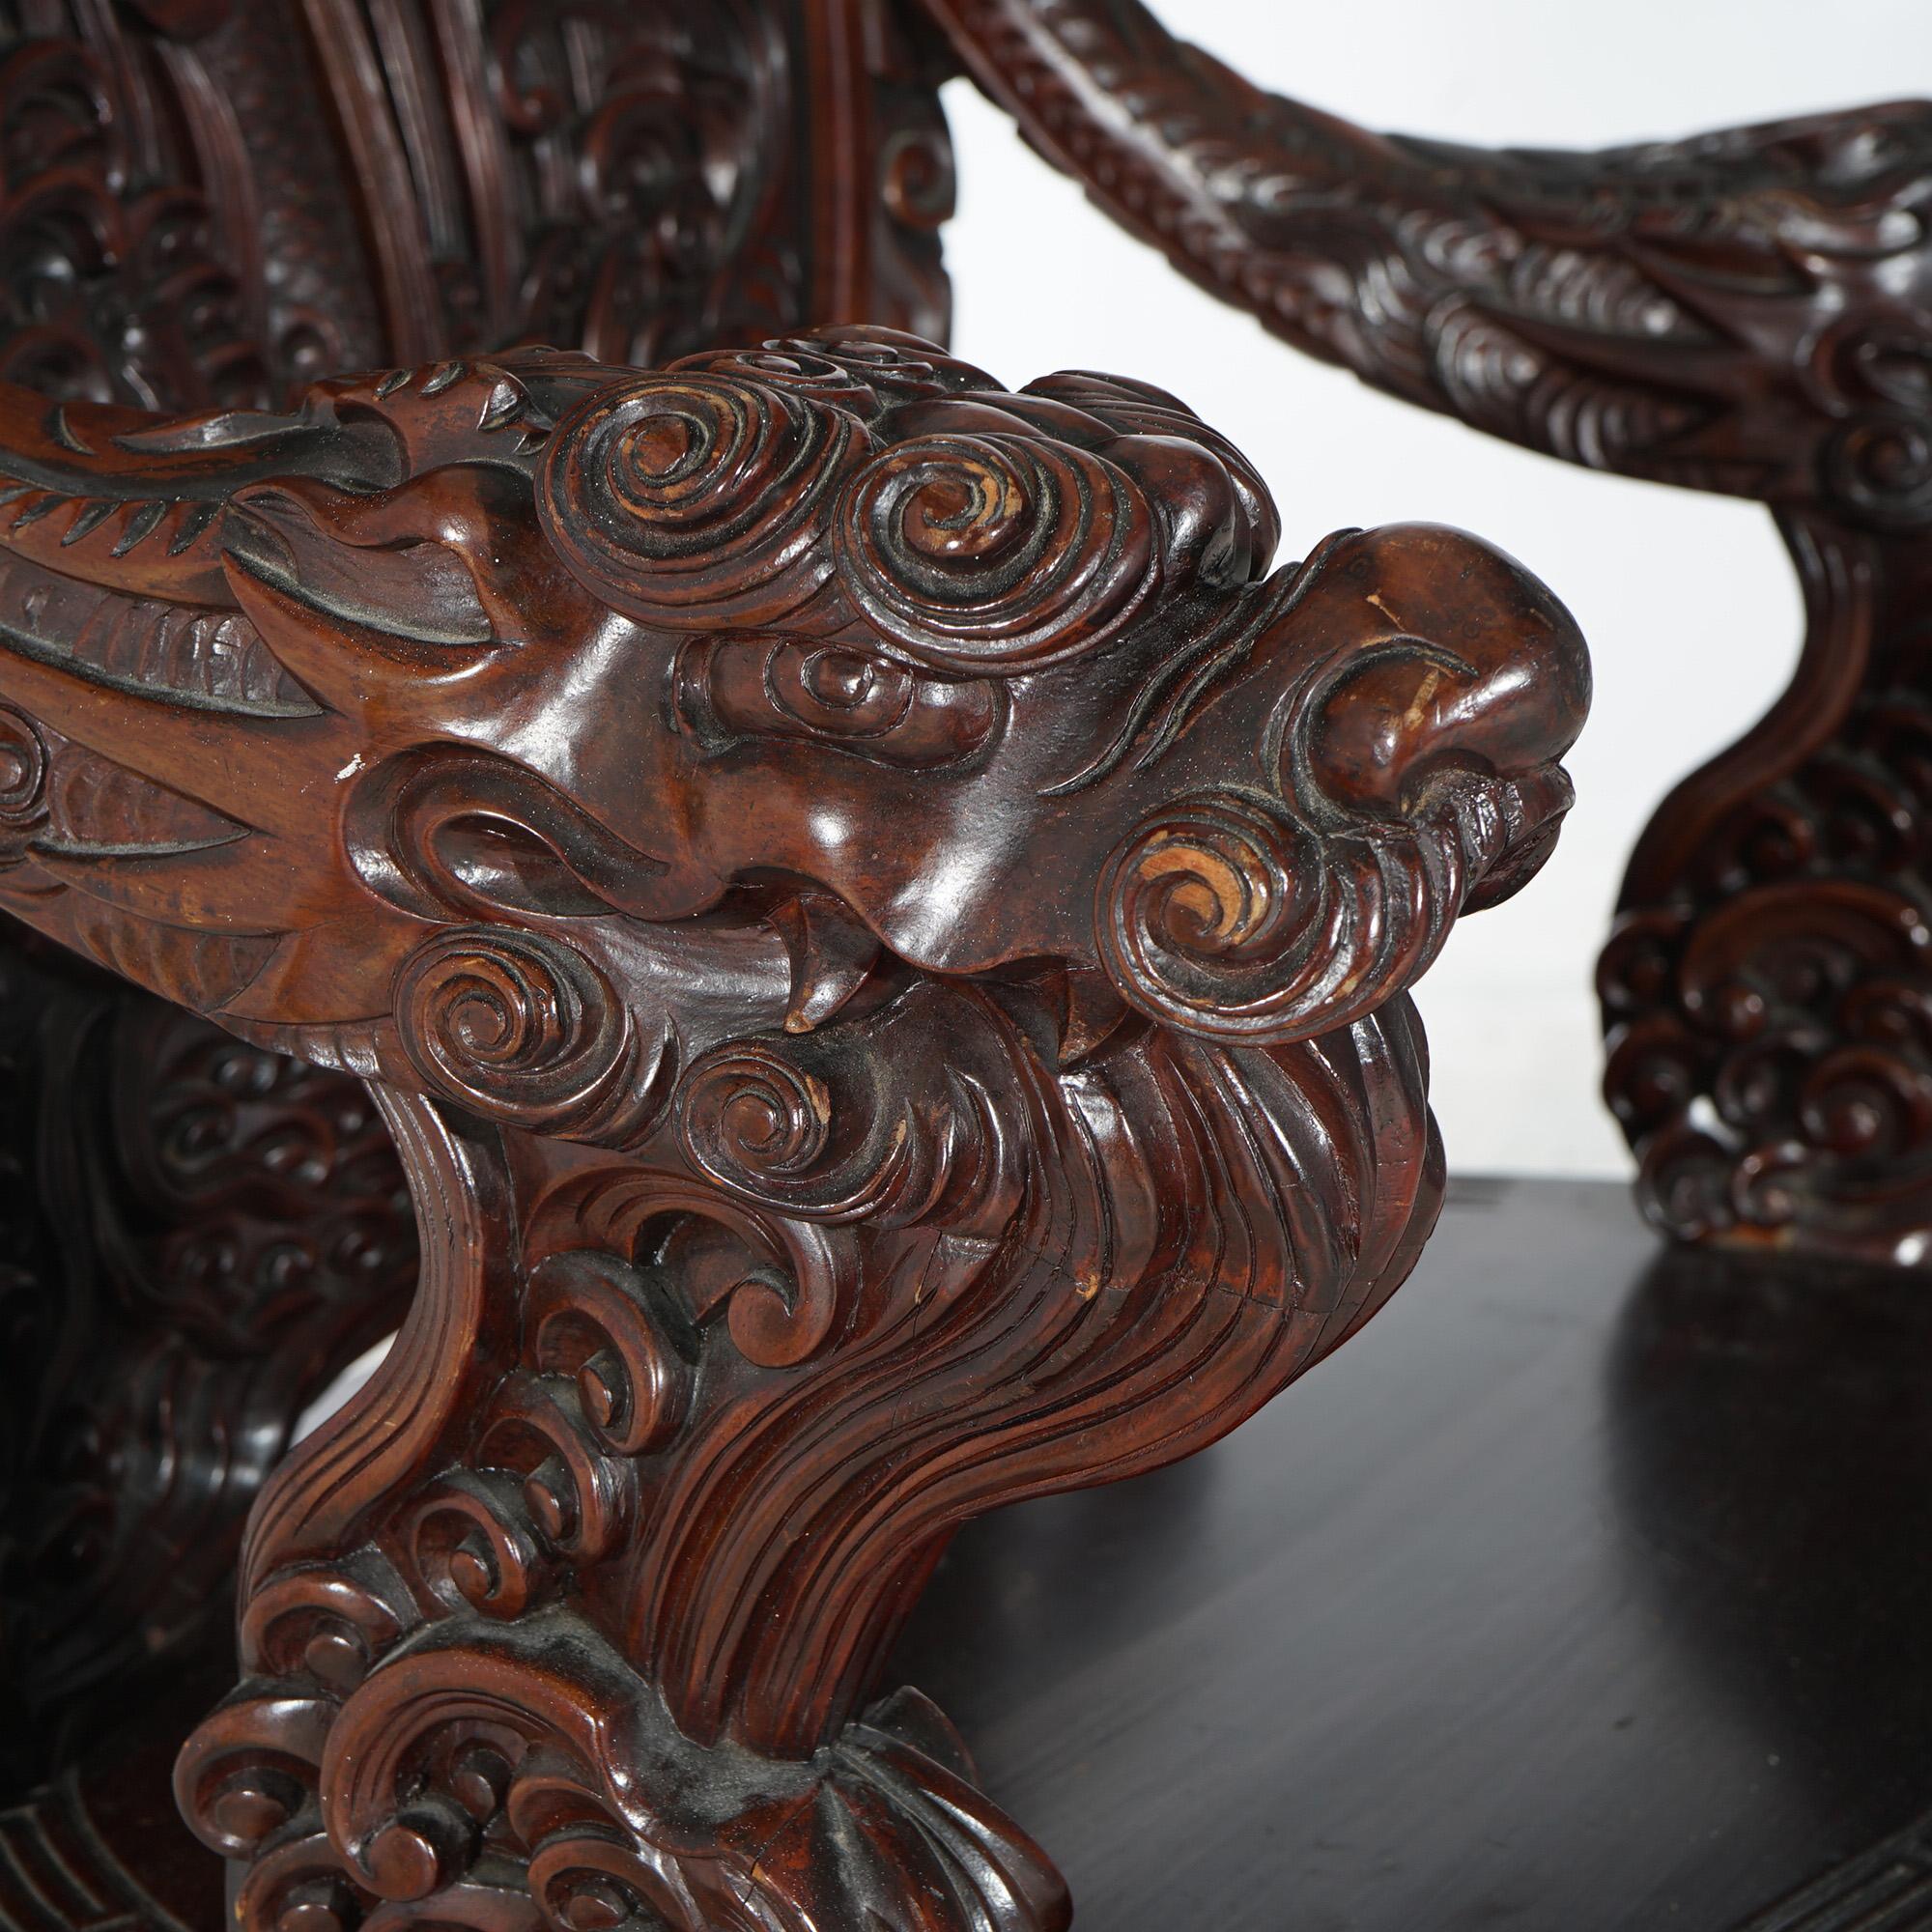 Antique Chinese Deep Carved Rosewood Figural King Throne Chair with Dragons 1920 For Sale 9